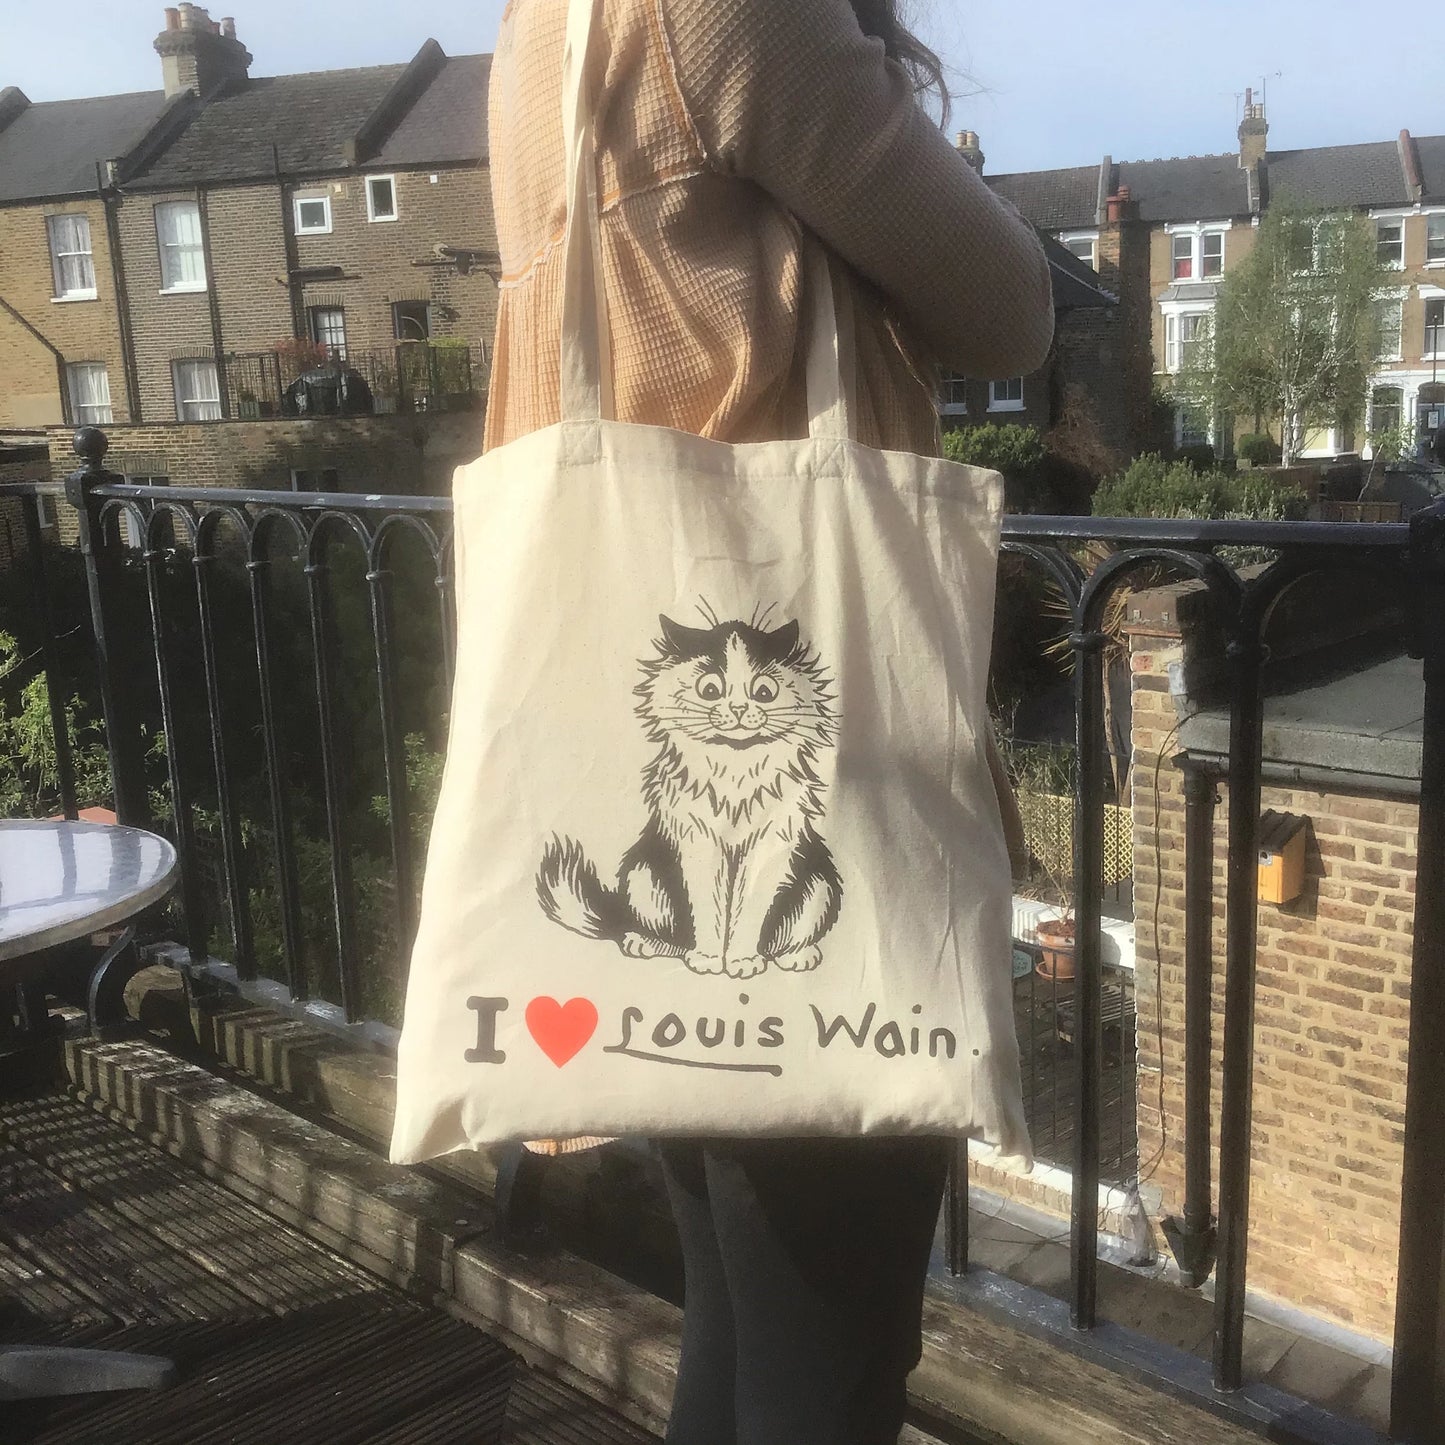 I Love Louis Wain Tote Bag! 100% Cotton Shopping Bag with Vintage Cat illustration. I Heart Louis Wain